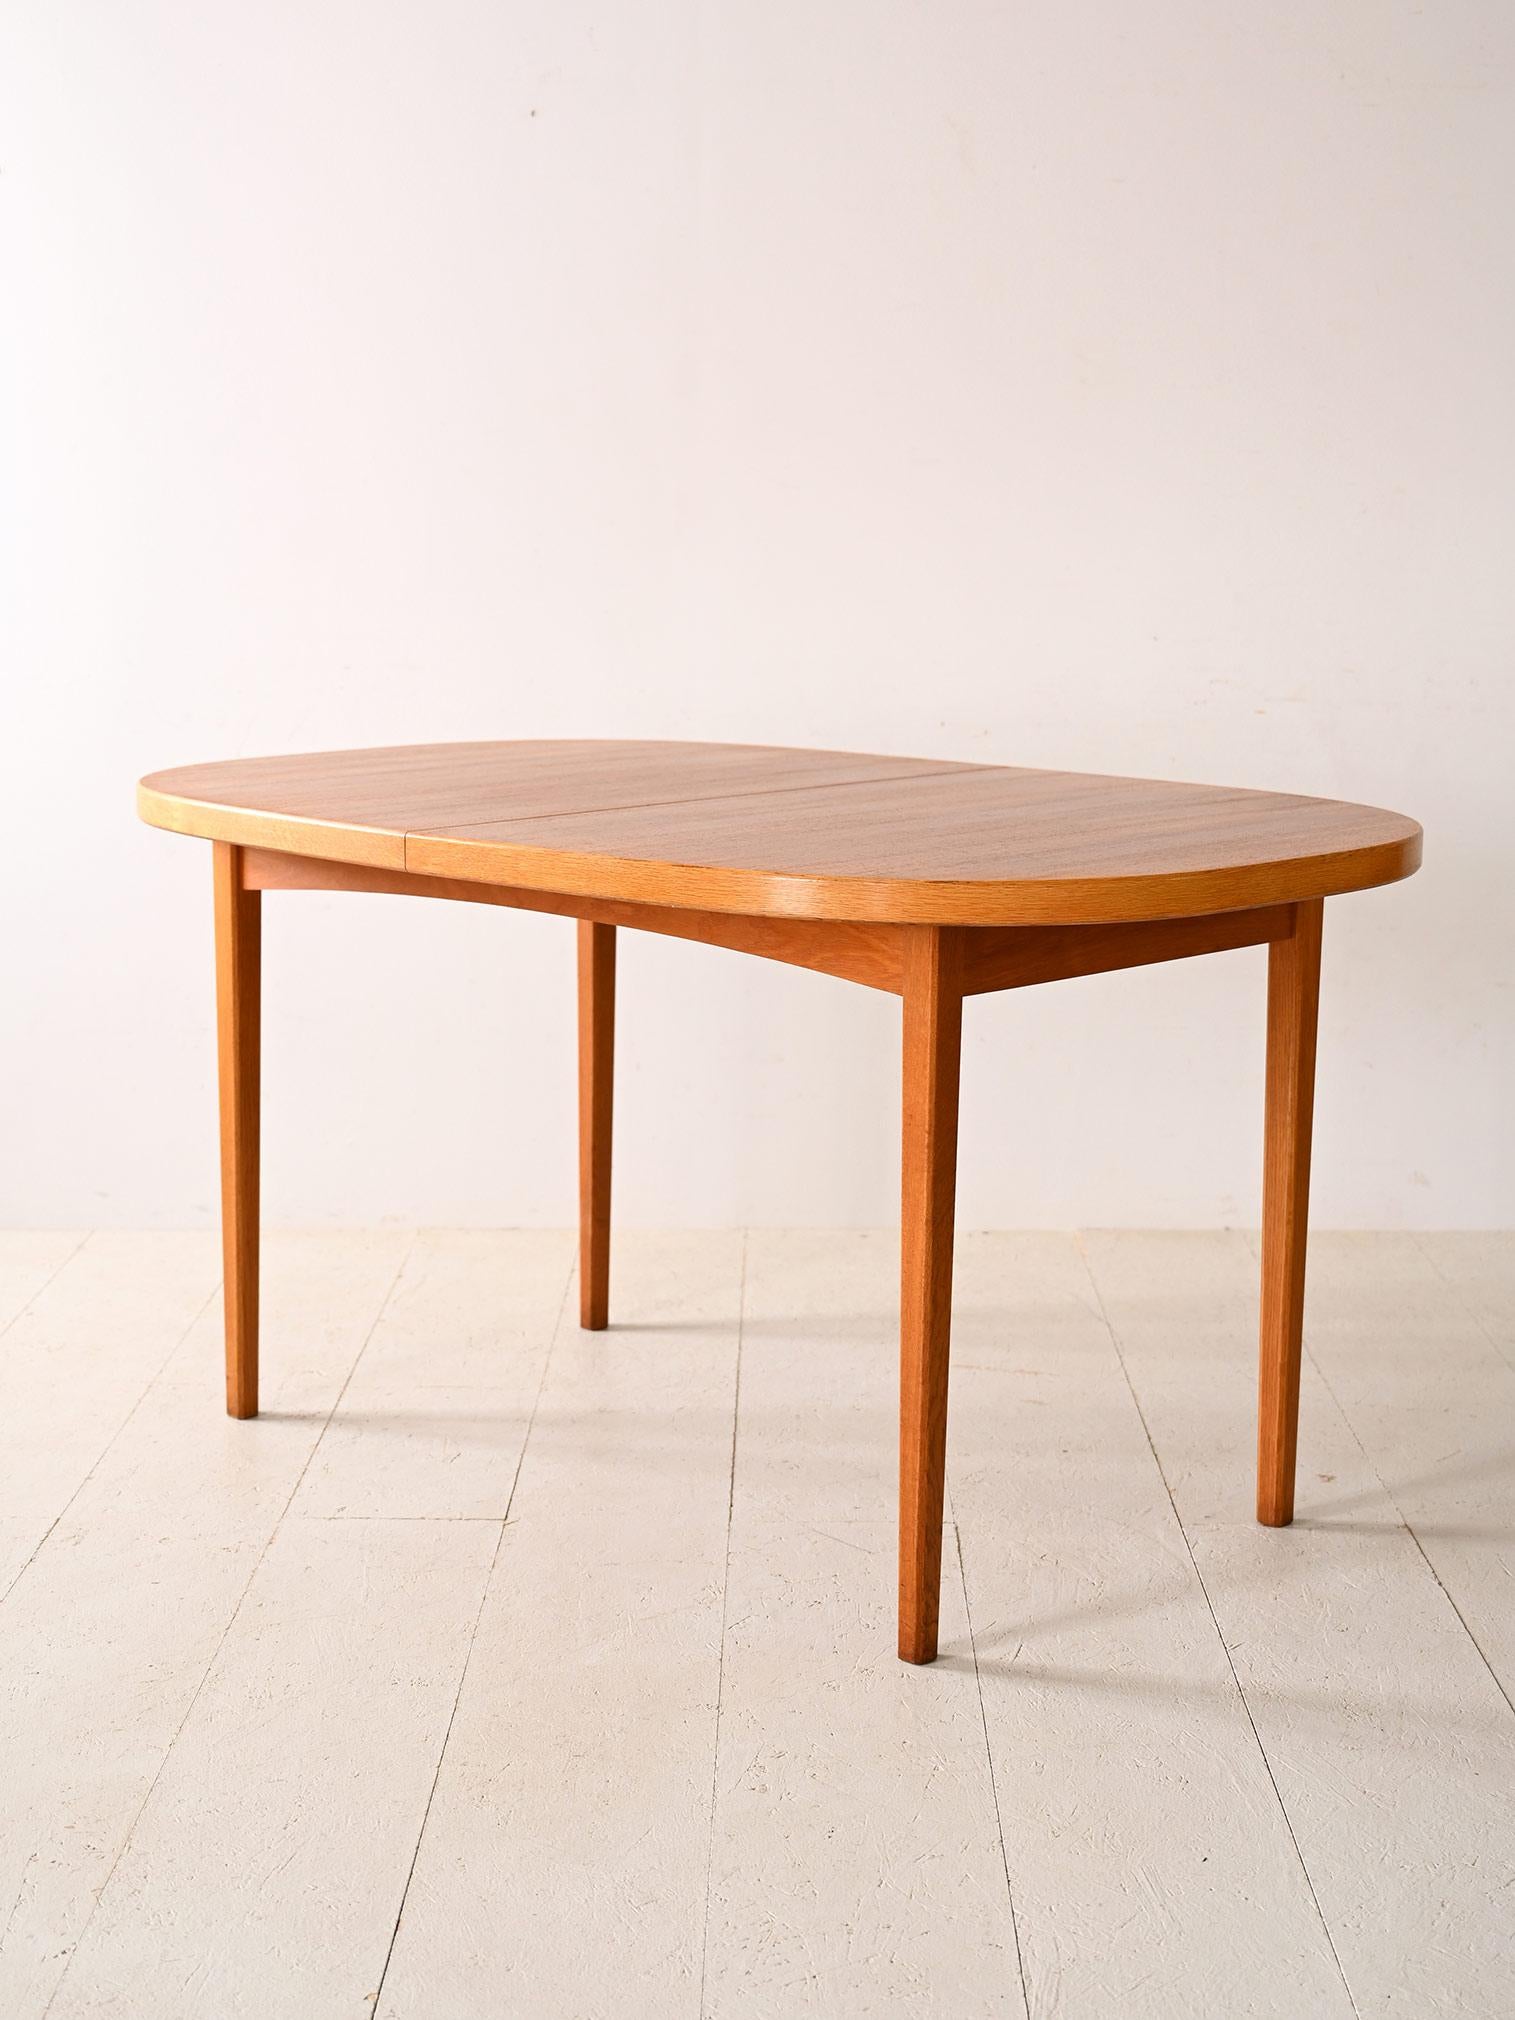 Teak dining table with round corners In Good Condition For Sale In Brescia, IT